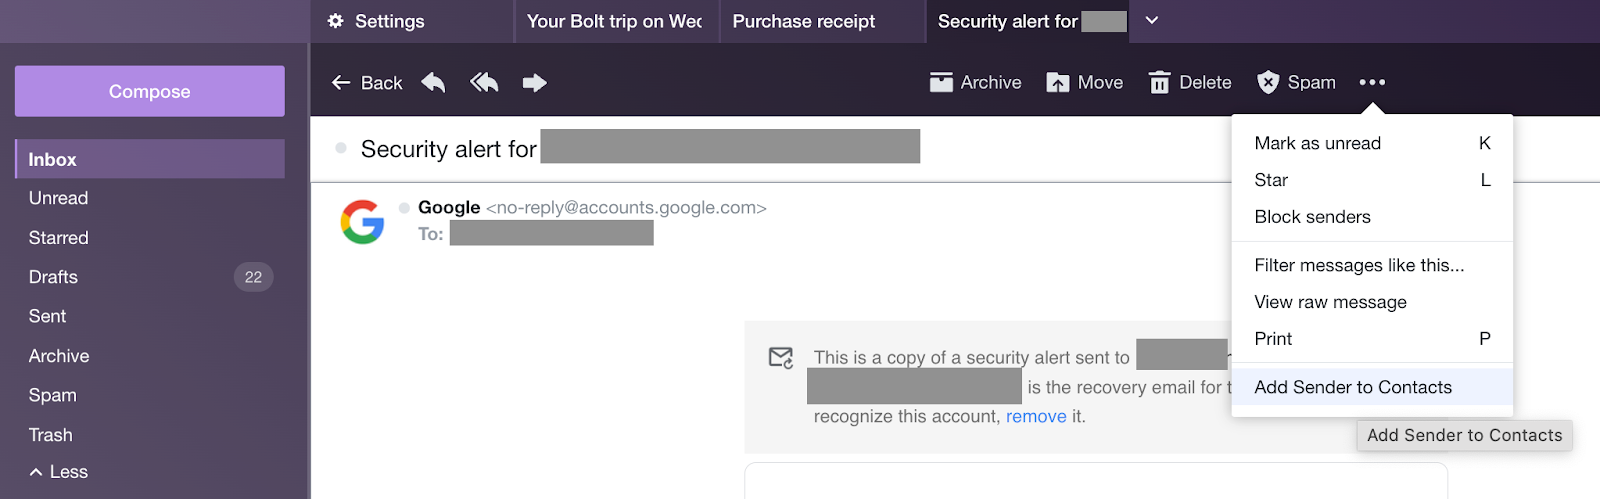 Whitelisting the sender by adding them to contacts in Yahoo 